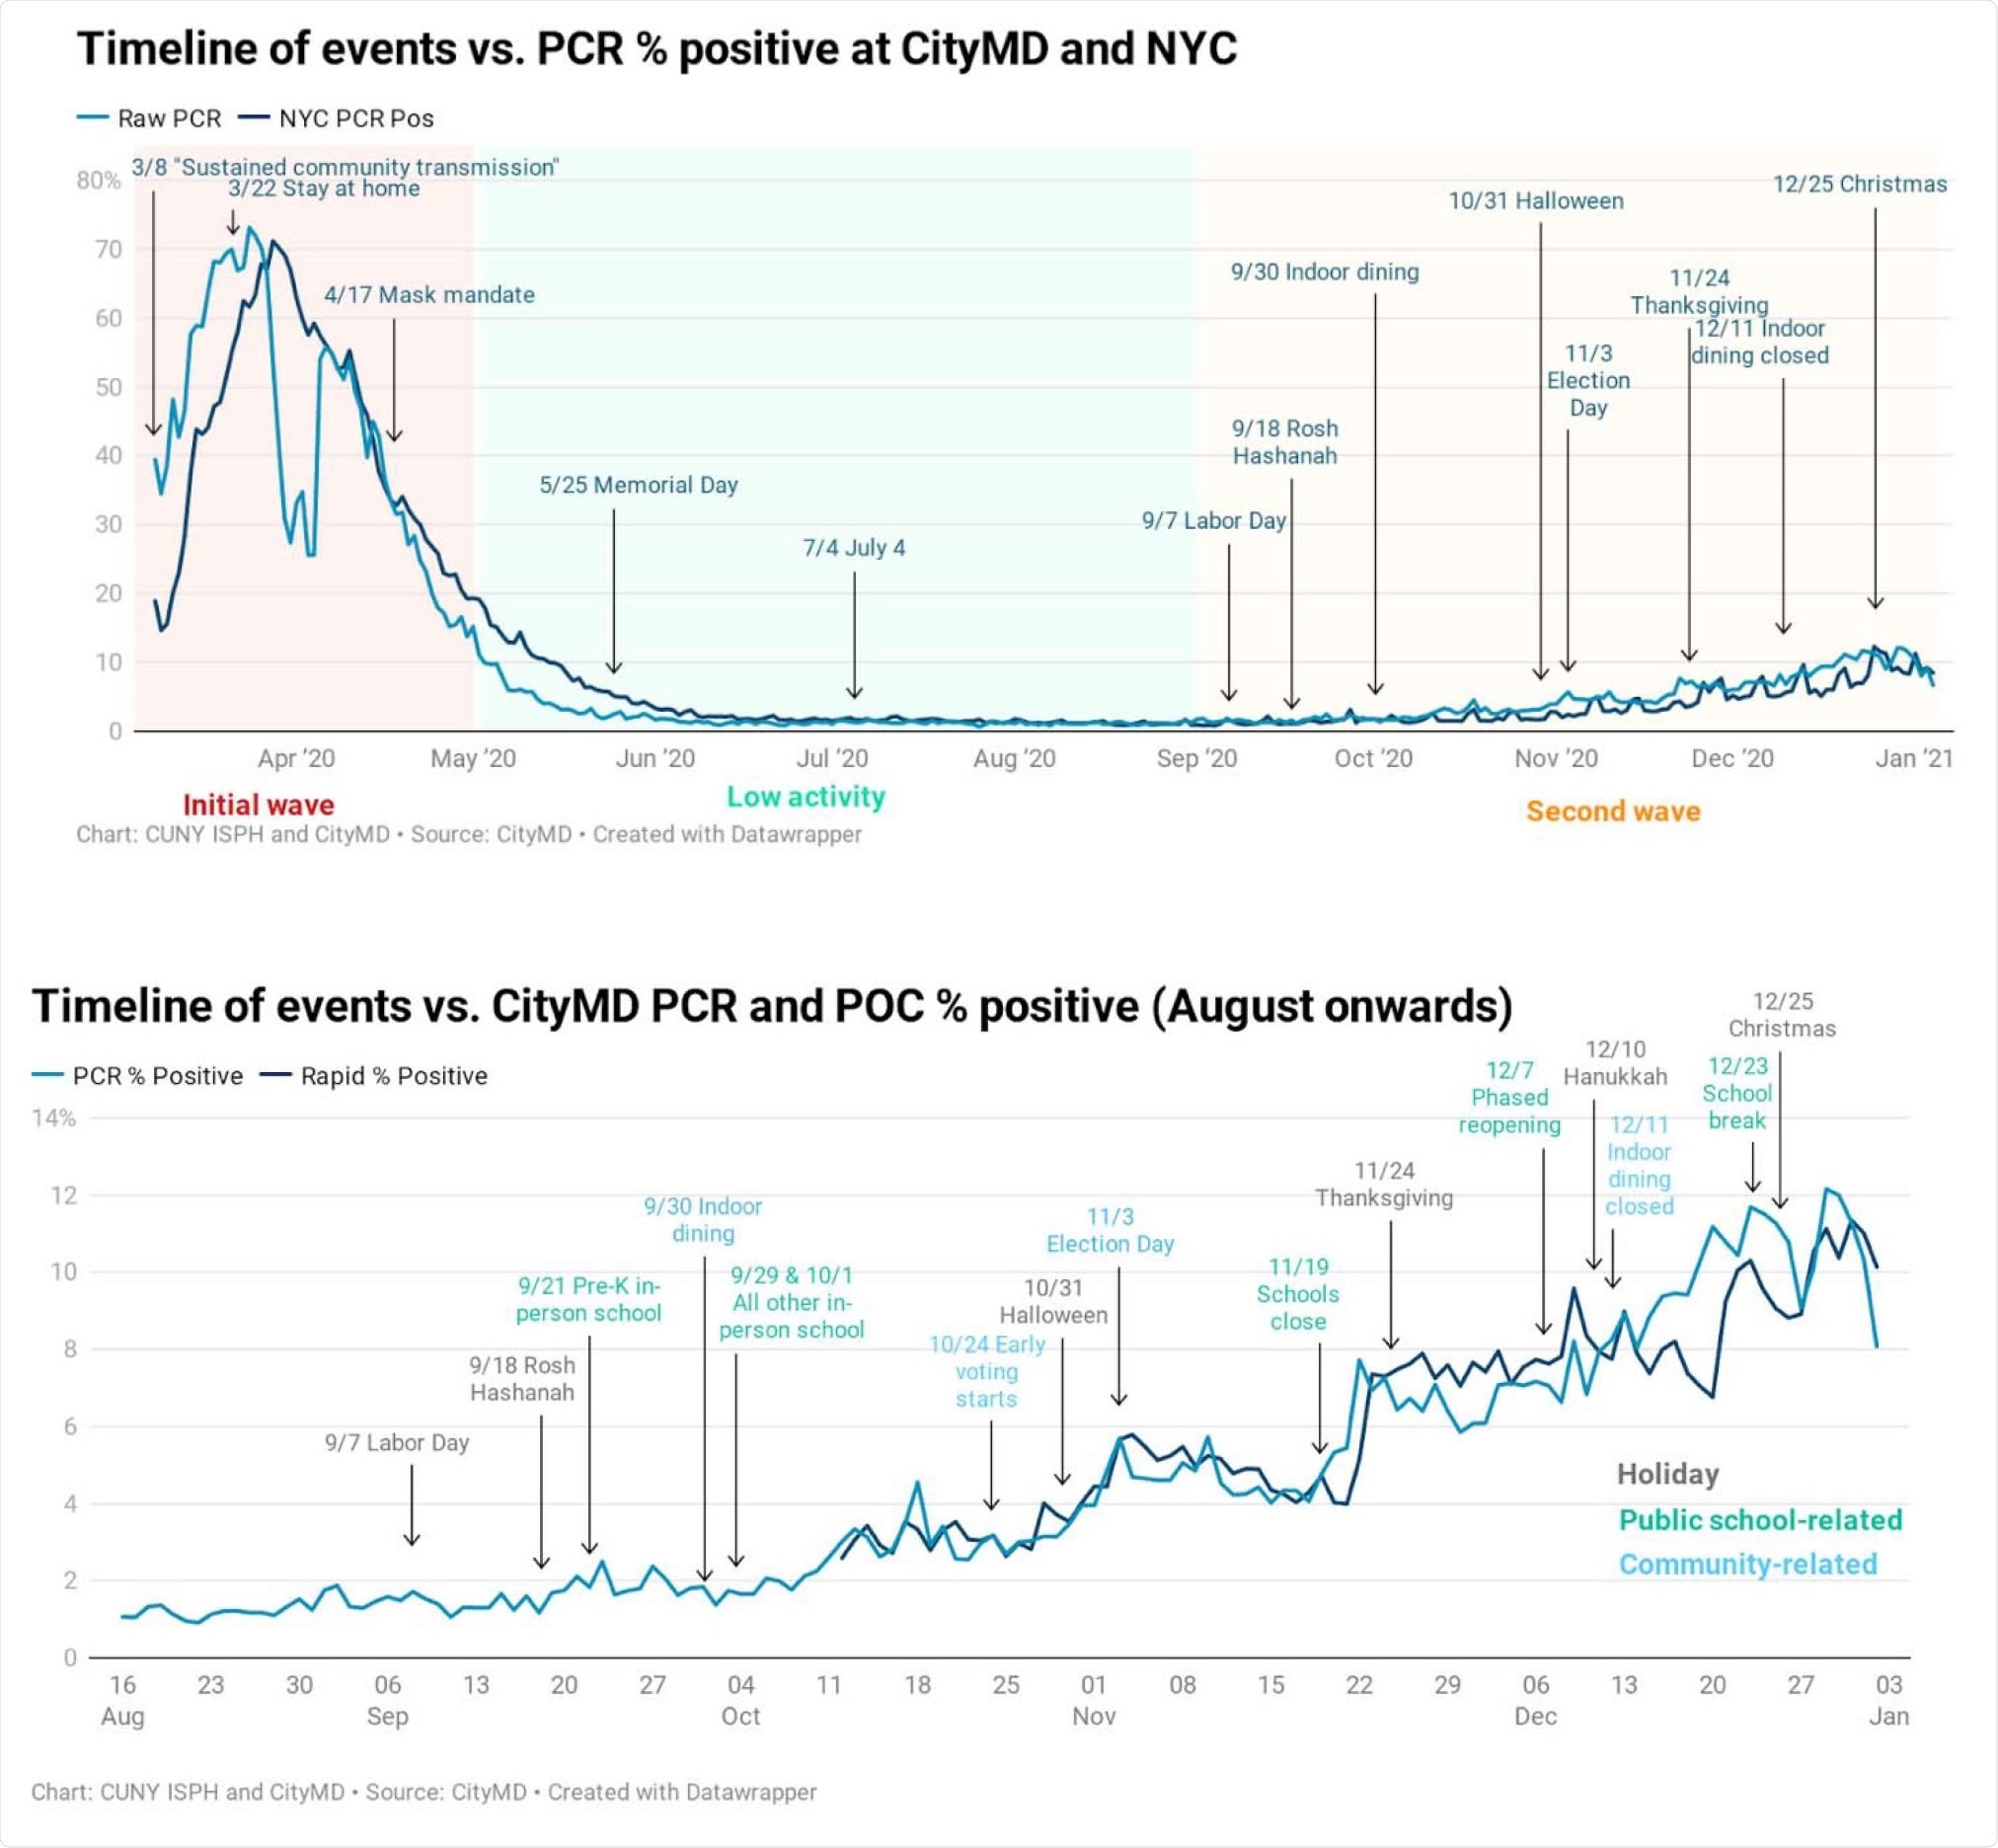 Main events potentially impacting the COVID-19 trends in NYC. Top panel shows PCR percent positivity for PCR tests done at CityMD (light blue) and in NYC (dark blue). The three periods of initial wave, low activity and second wave are shaded in red, blue, and yellow respectively. Bottom panel shows PCR (light blue) and rapid antigen tests (dark blue) positivity rates for CityMD testers focusing on the second wave of the pandemic in NYC. Raw data was used to calculate positivity rates in both plots to be able to visualize the spikes in cases occurring after events that might have facilitated increased in-person contacts. PCR: Polymerase chain reaction. POC: Point-of-care rapid antigen tests.